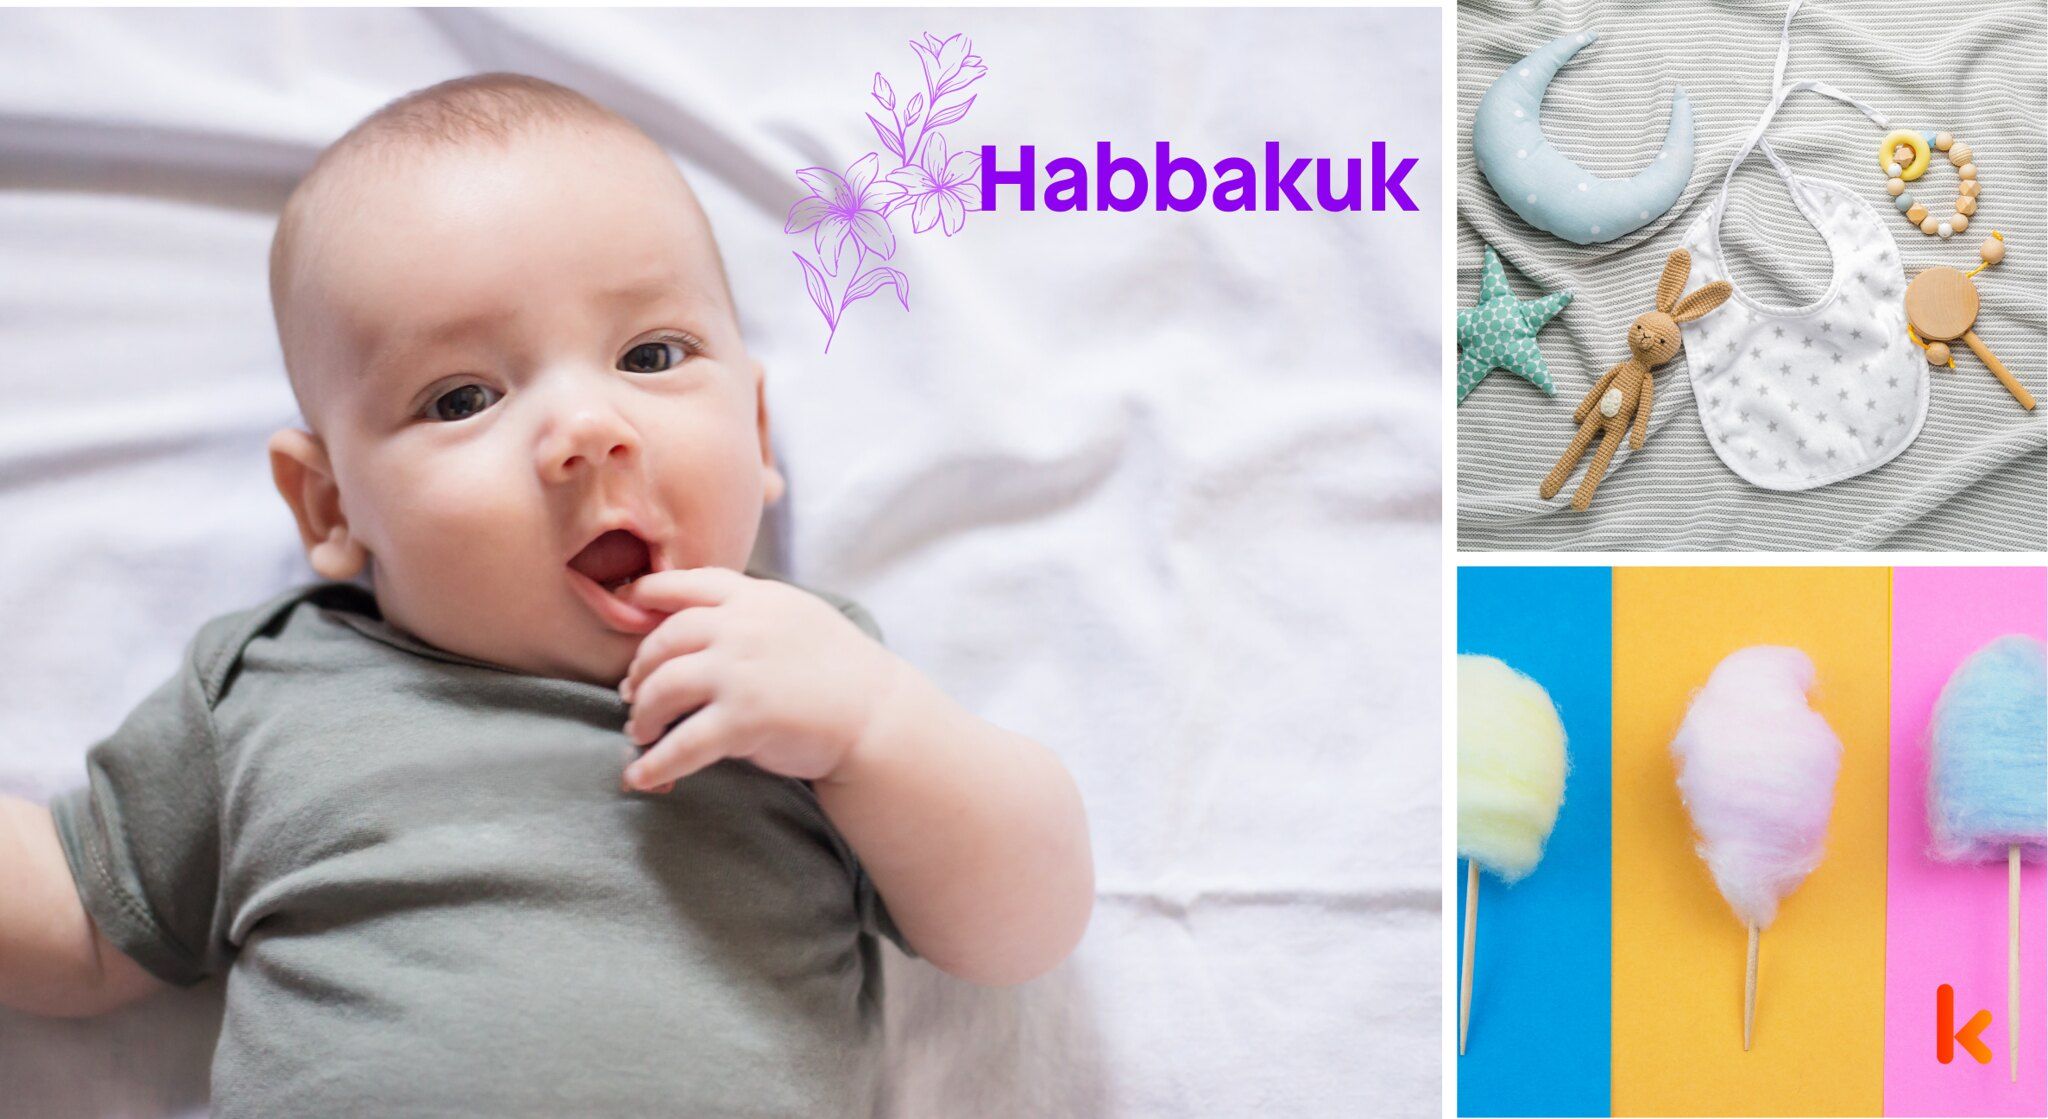 Meaning of the name Habbakuk